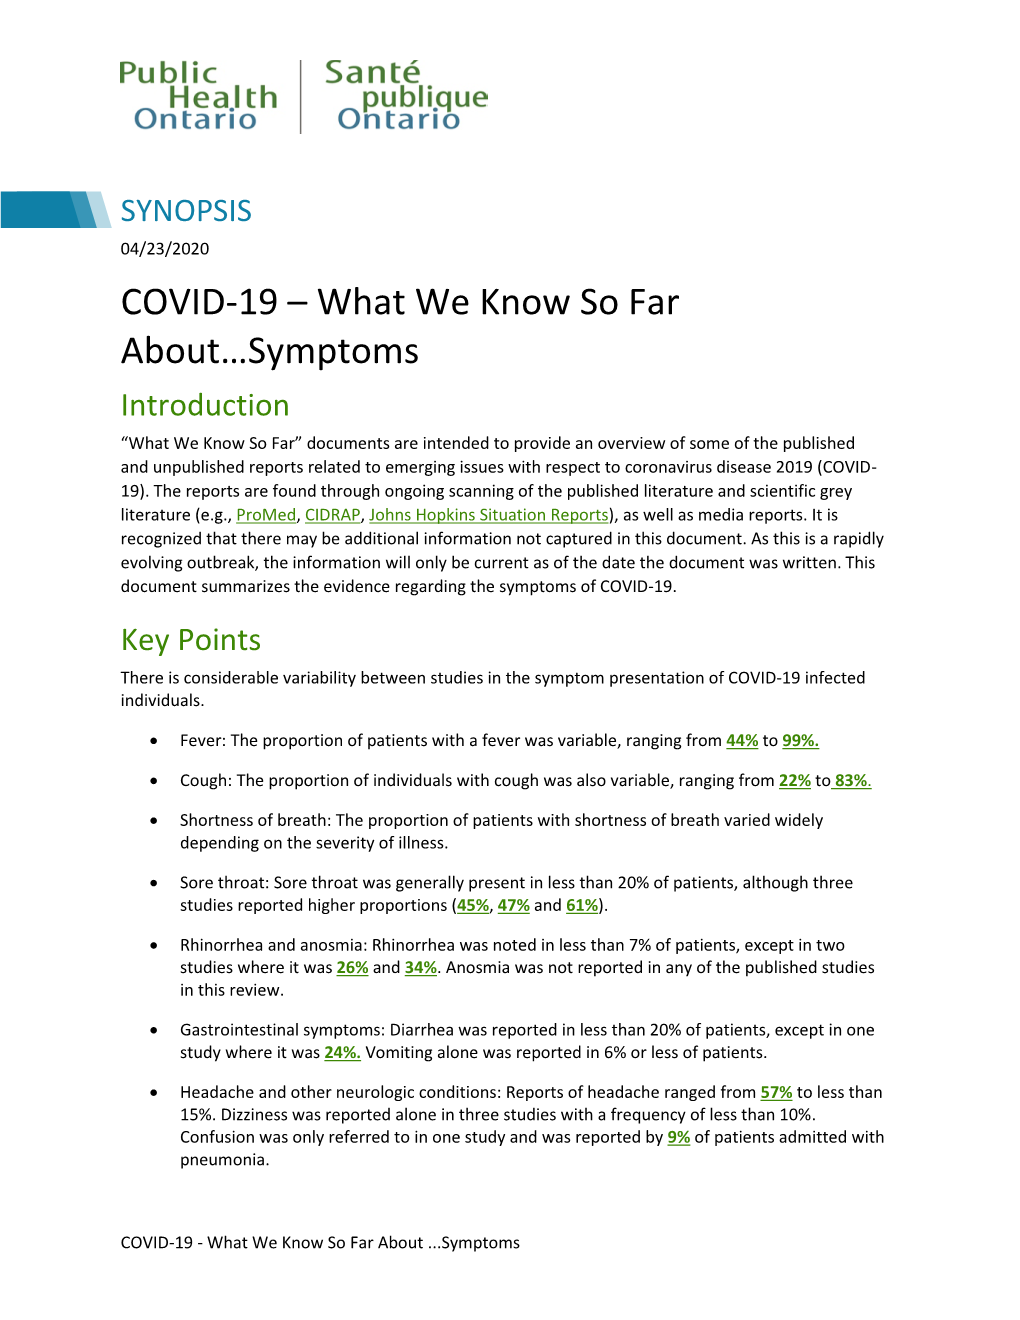 COVID-19 – What We Know So Far About…Symptoms